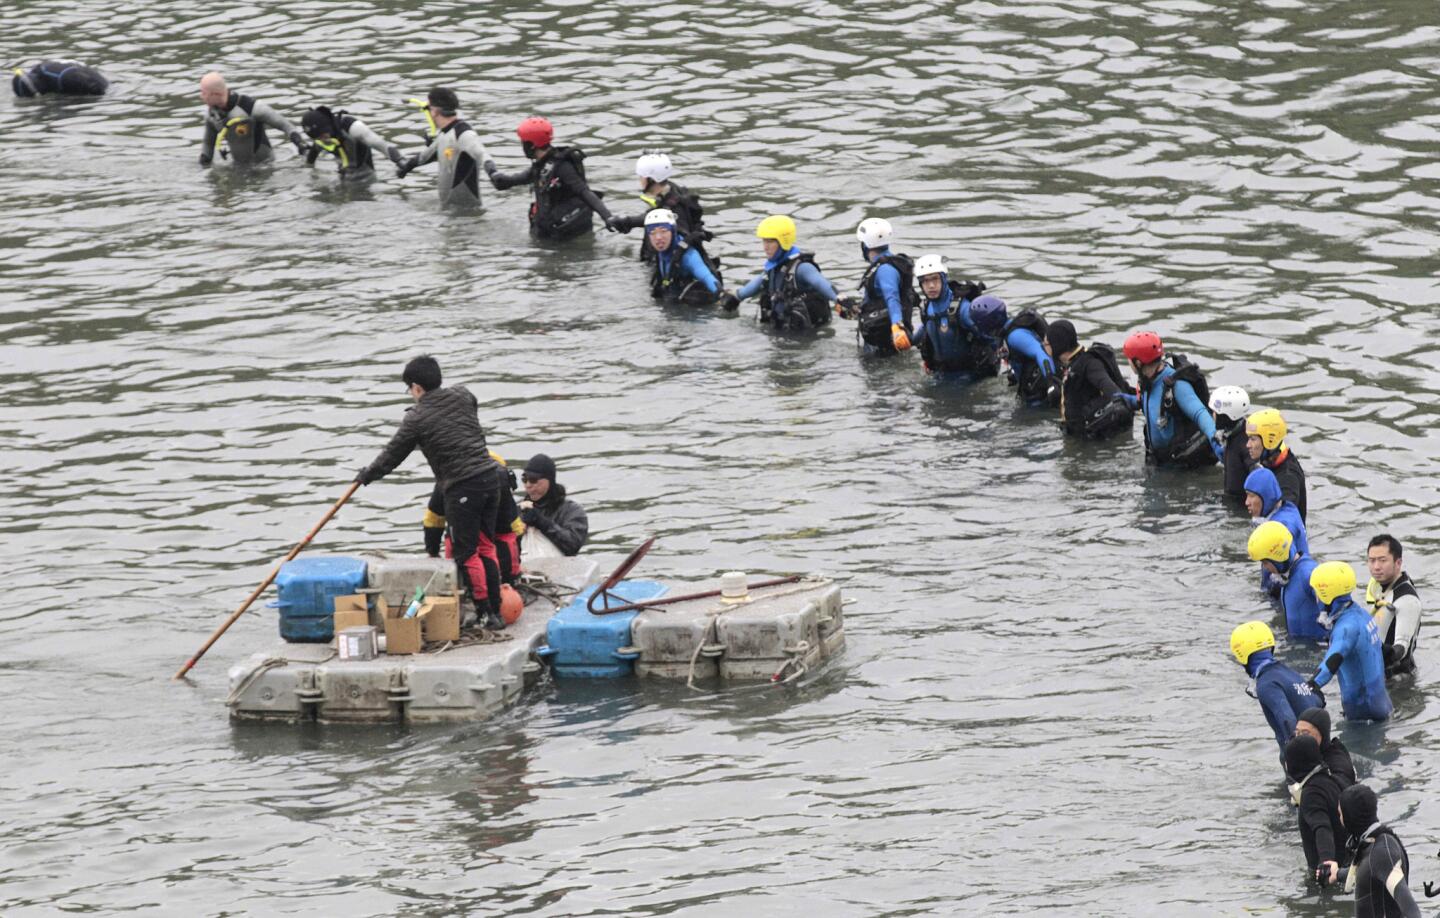 Divers continue to search for the missing at the site of a TransAsia Airways crash in Taipei, Taiwan.